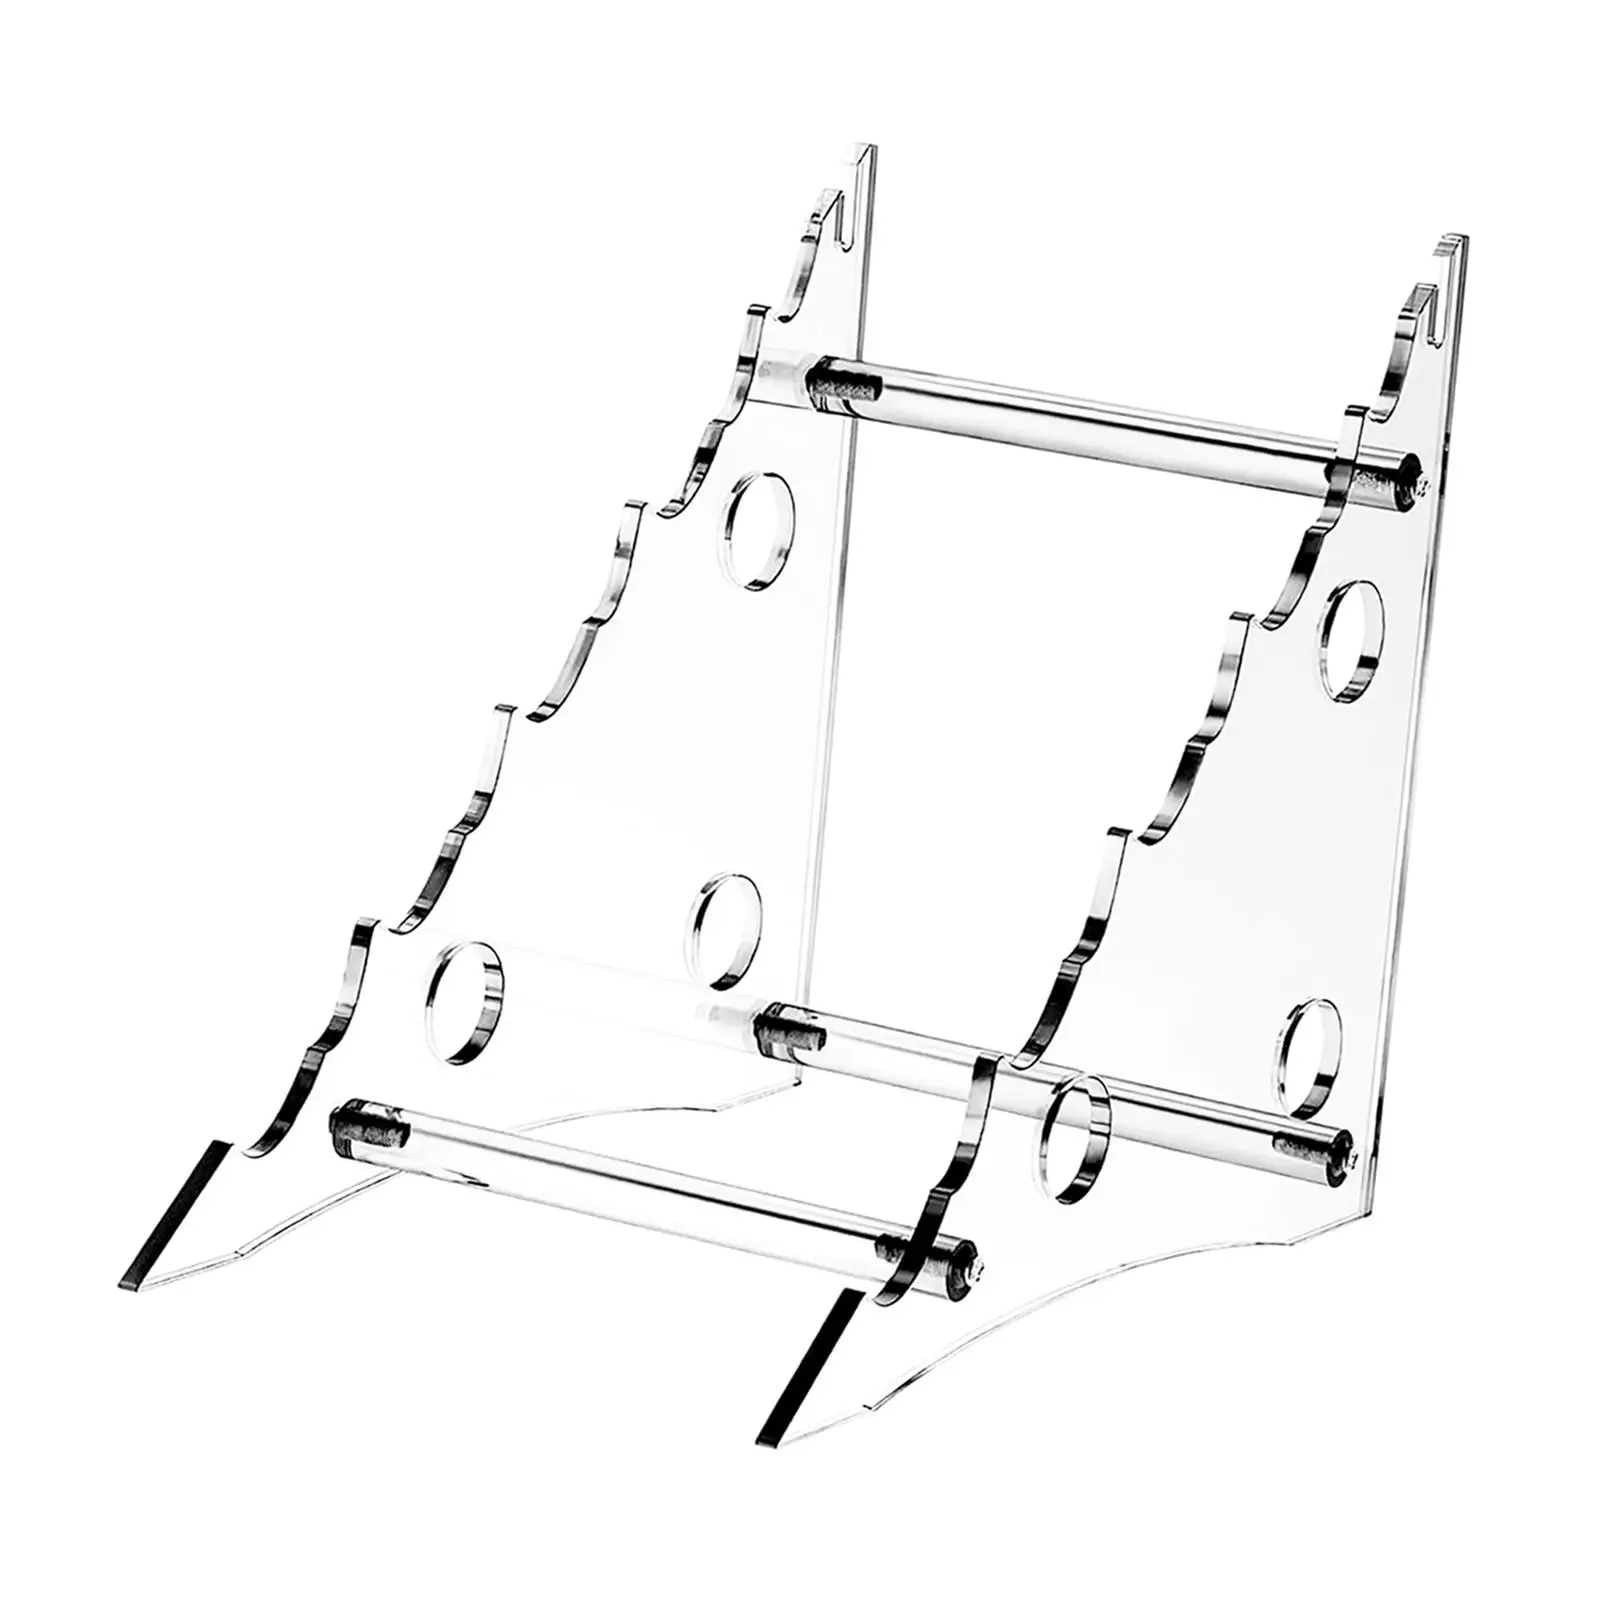 4 Layer Display Holder Base Bracket Store Collection Acrylic Display Holder for Tabletop Living Room Shelf Decor